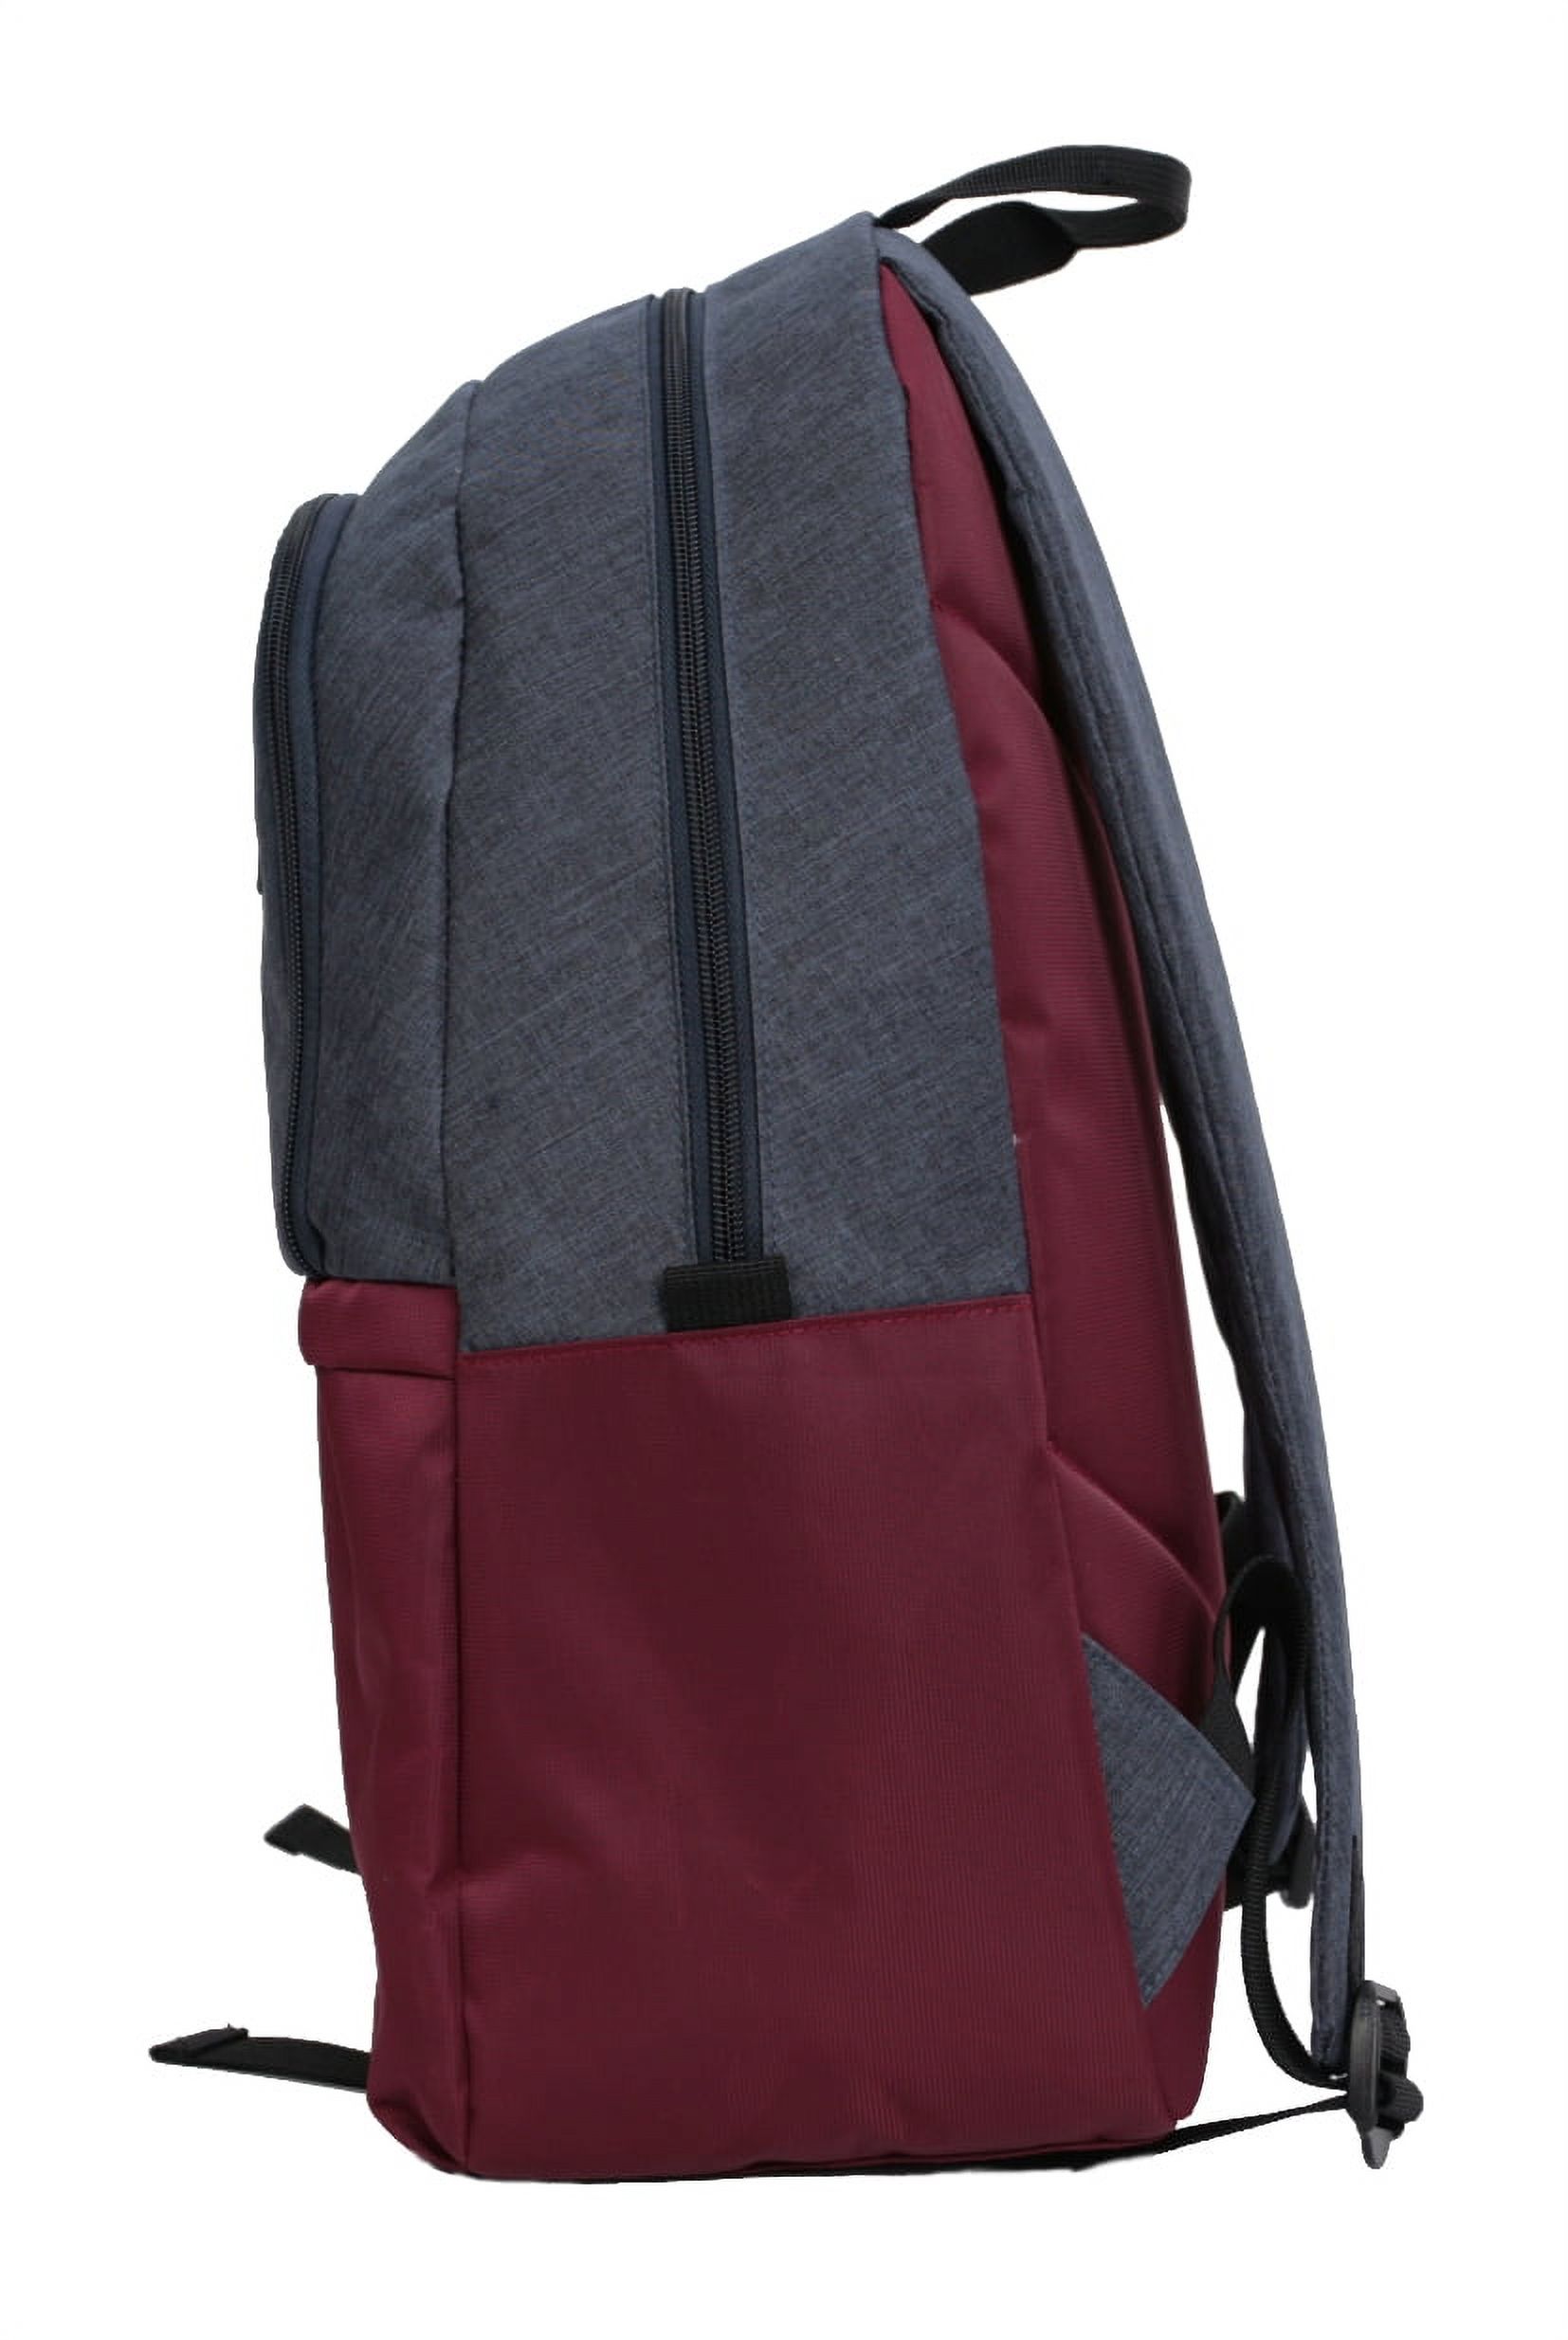 Protege 18" Heather Colorblock Adult Backpack, Navy/Maroon - Unisex - image 2 of 5